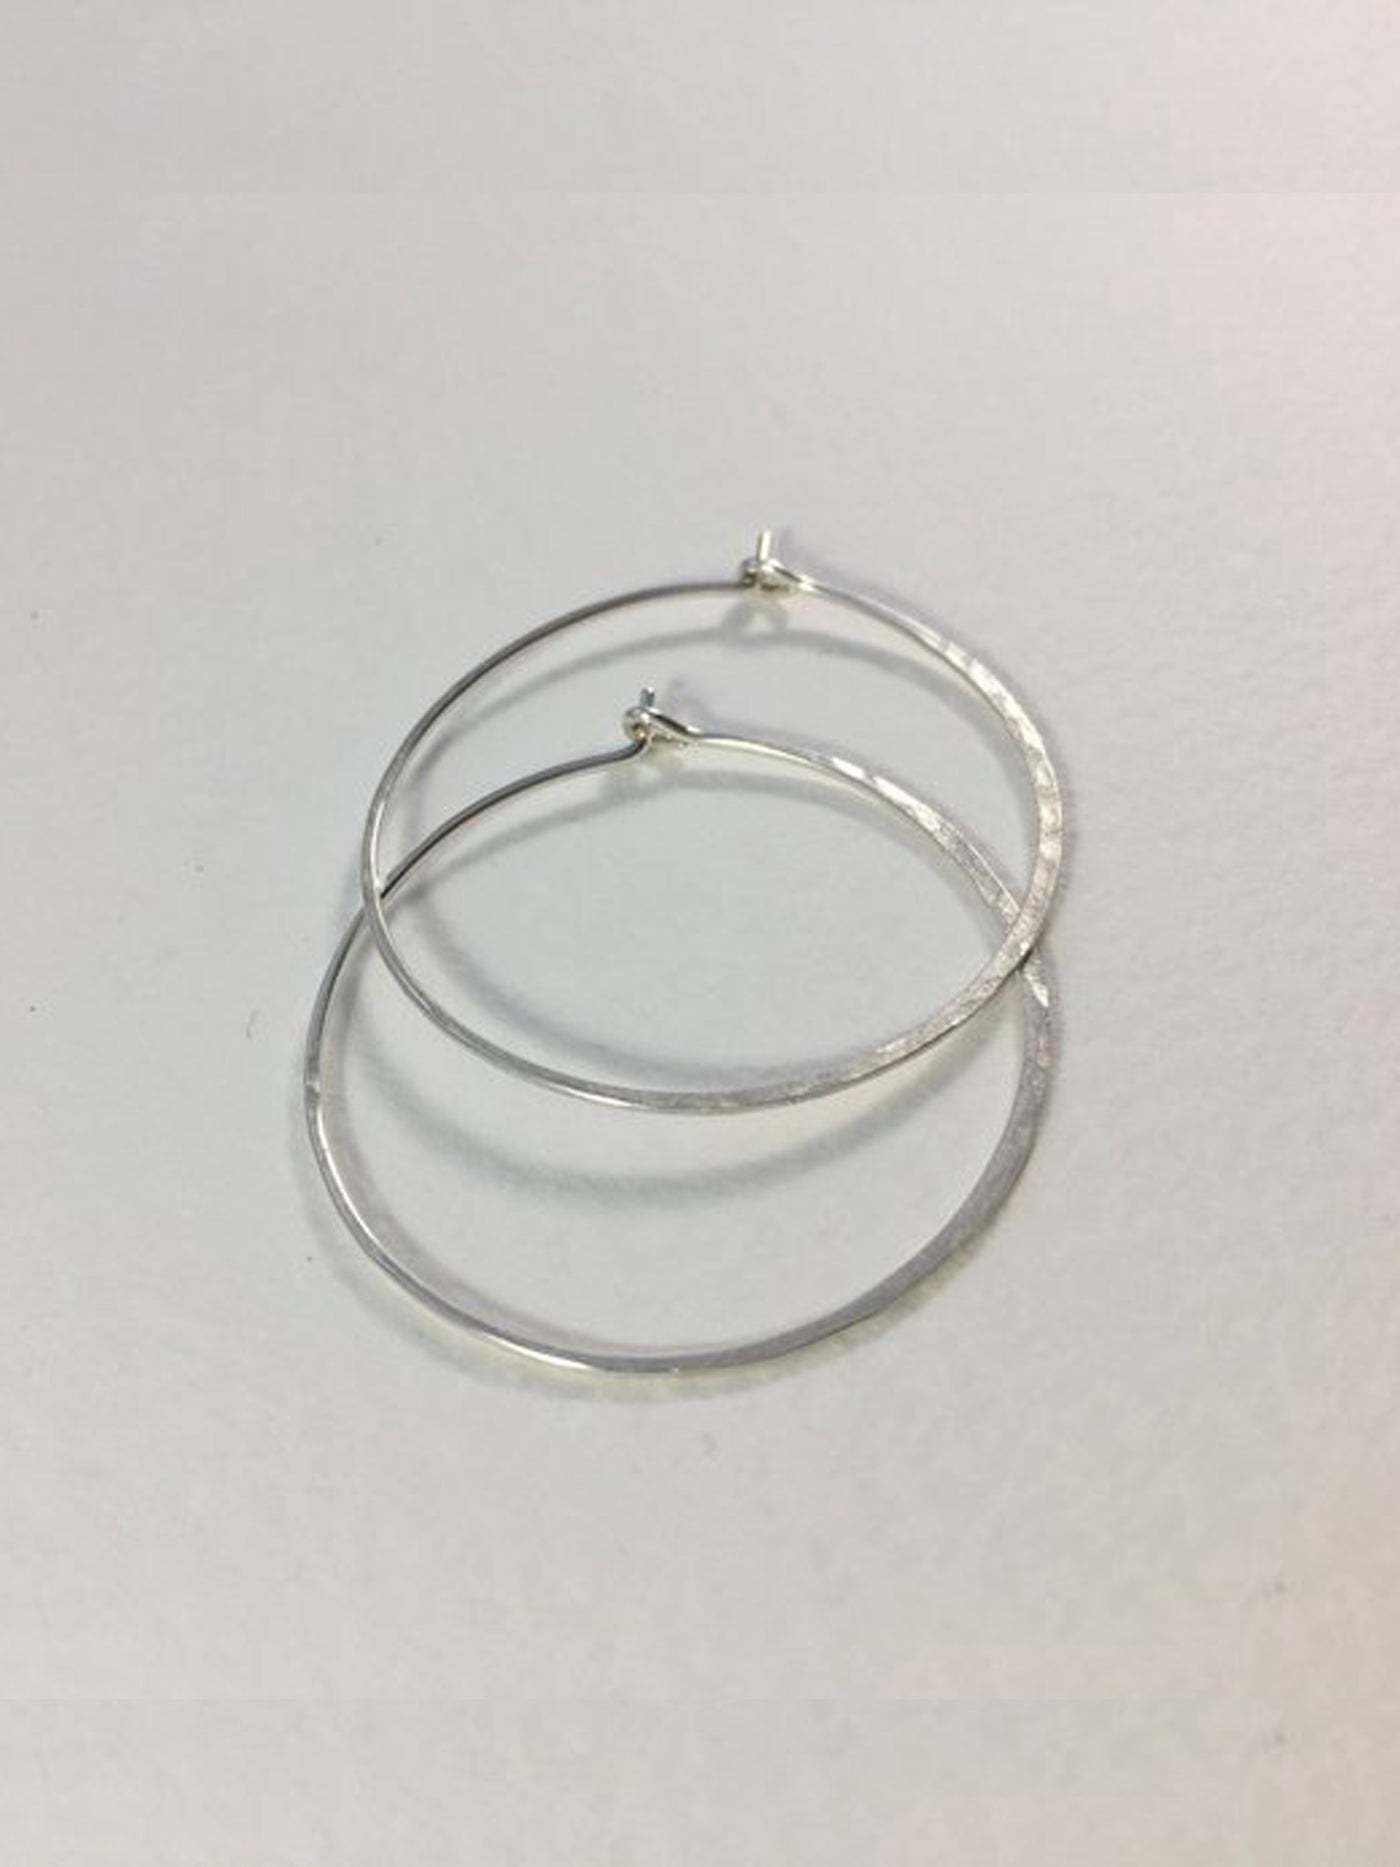 Silver Large Crescent Moon Hoops made from 20 gauge wire are hand made with high quality hammered sterling silver metal and measure 1.5" across.